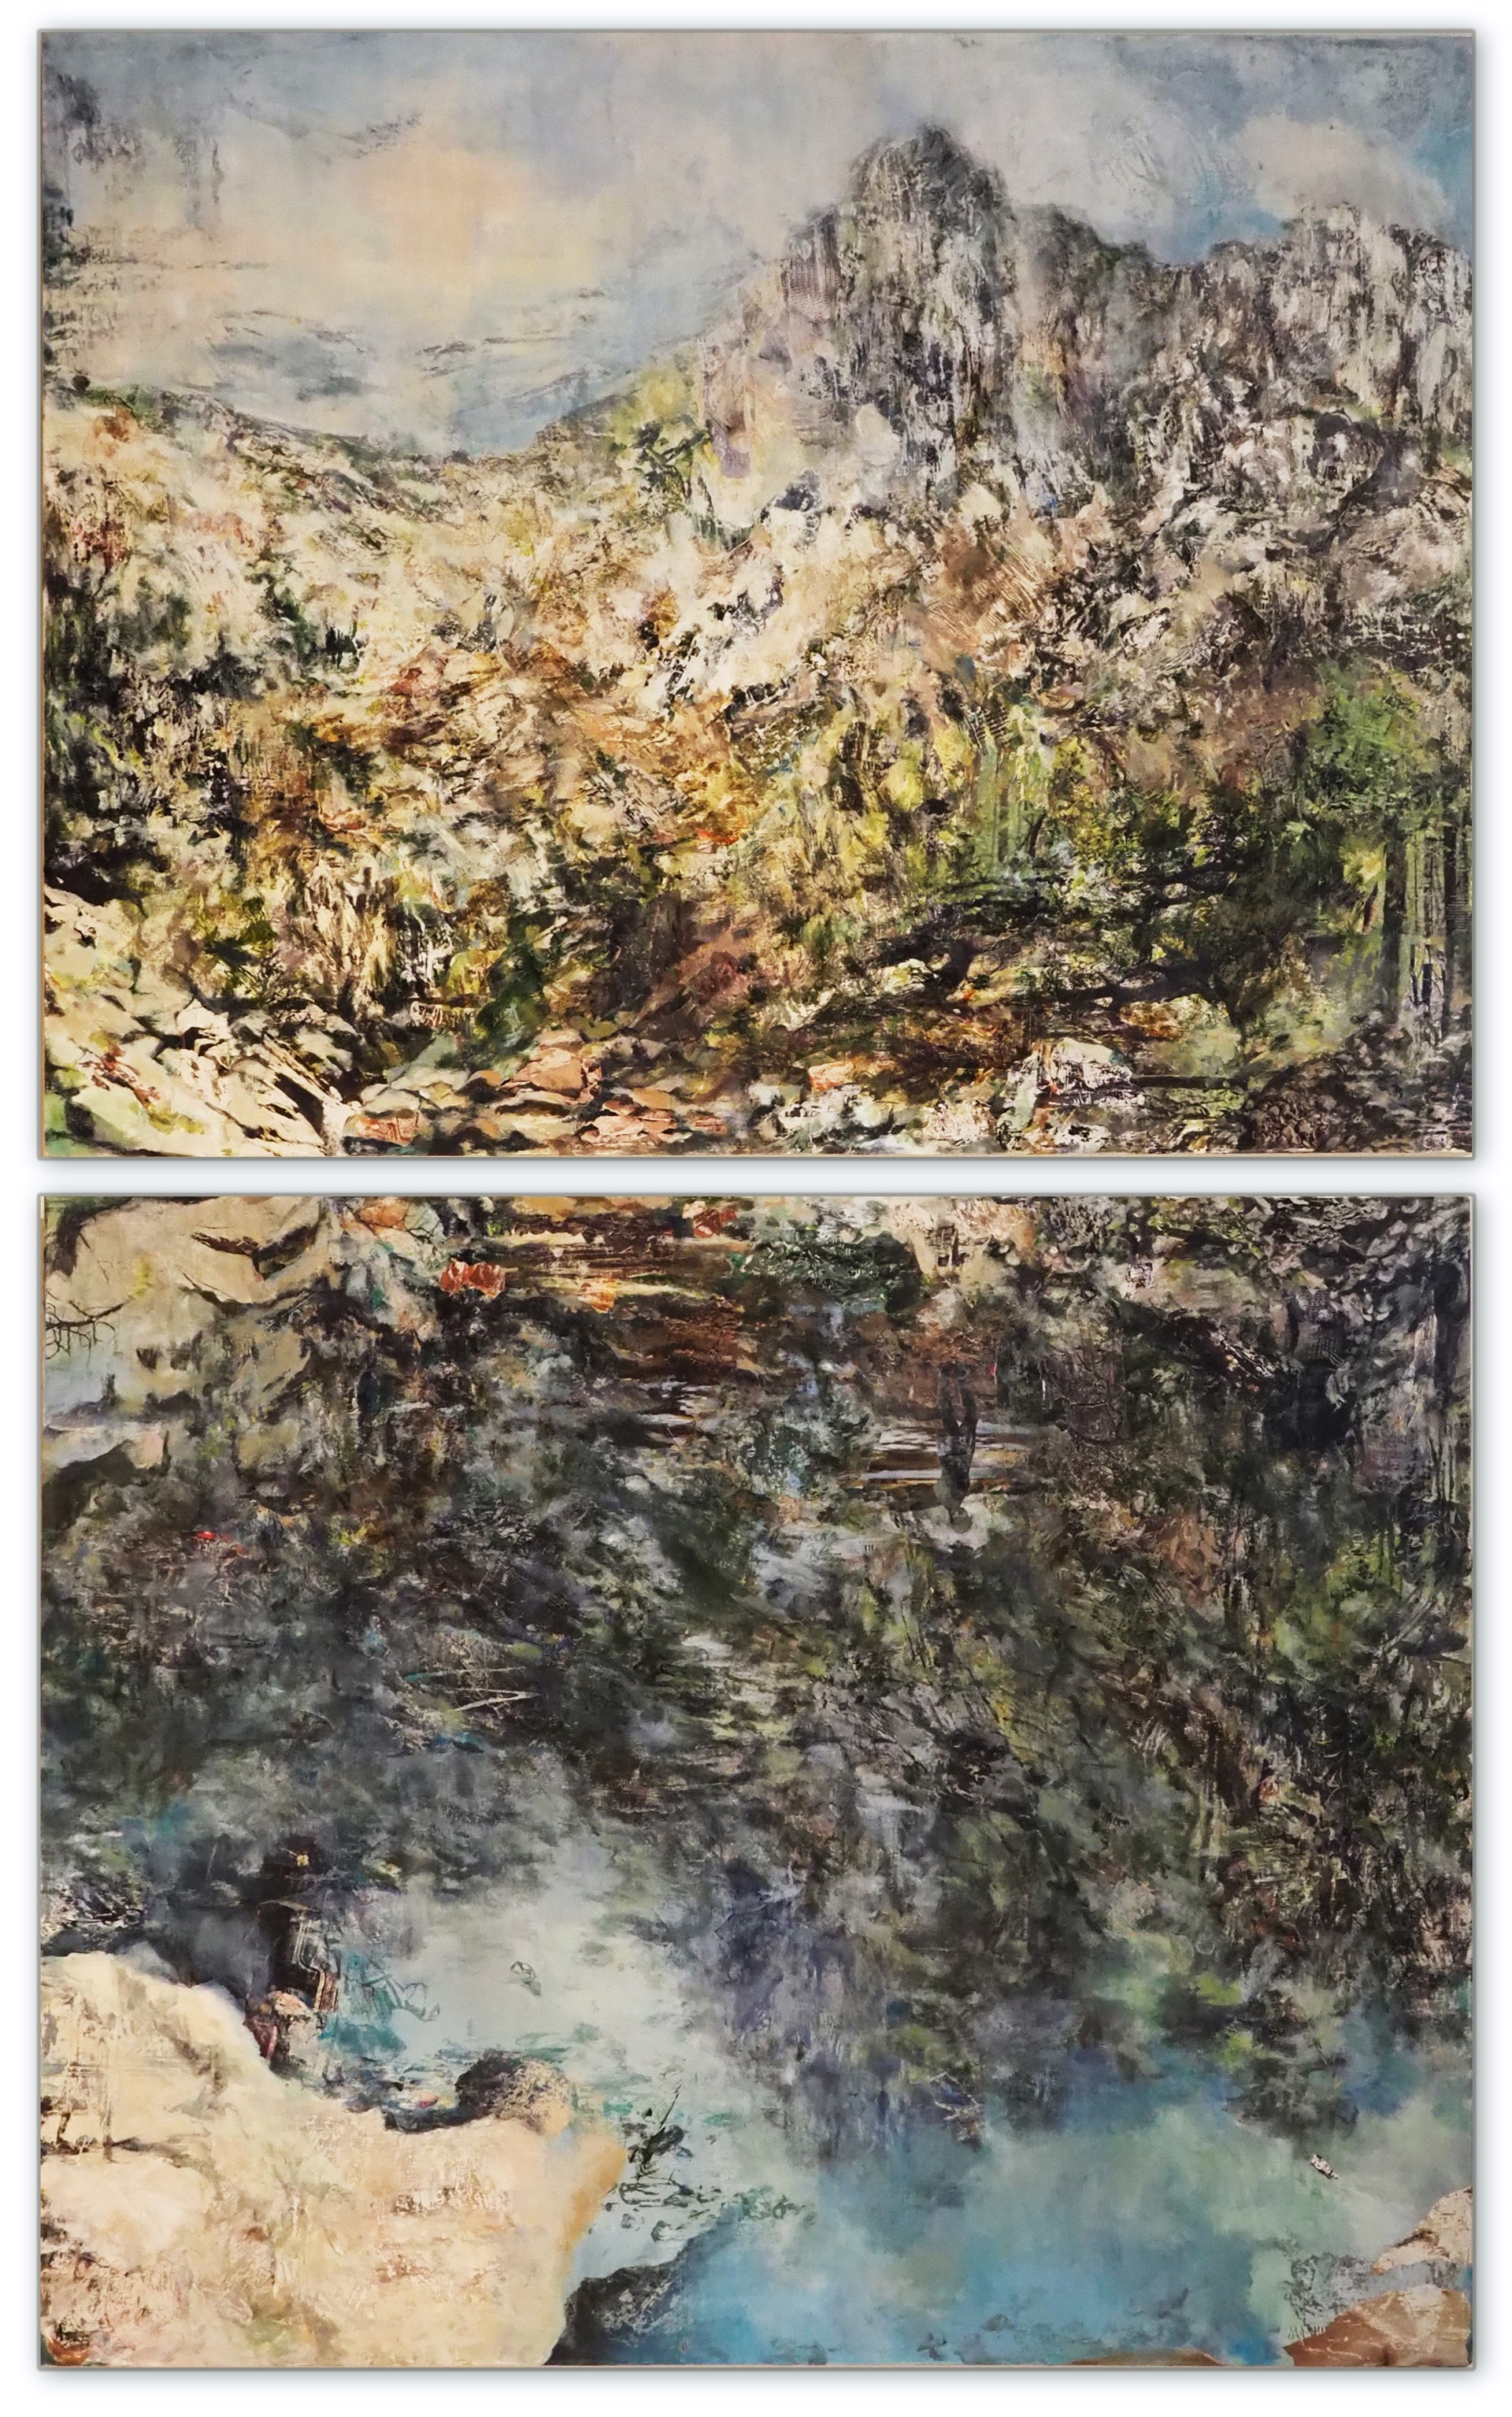 Mountain Mirror (Diptych) by Mandy Rogers Horton